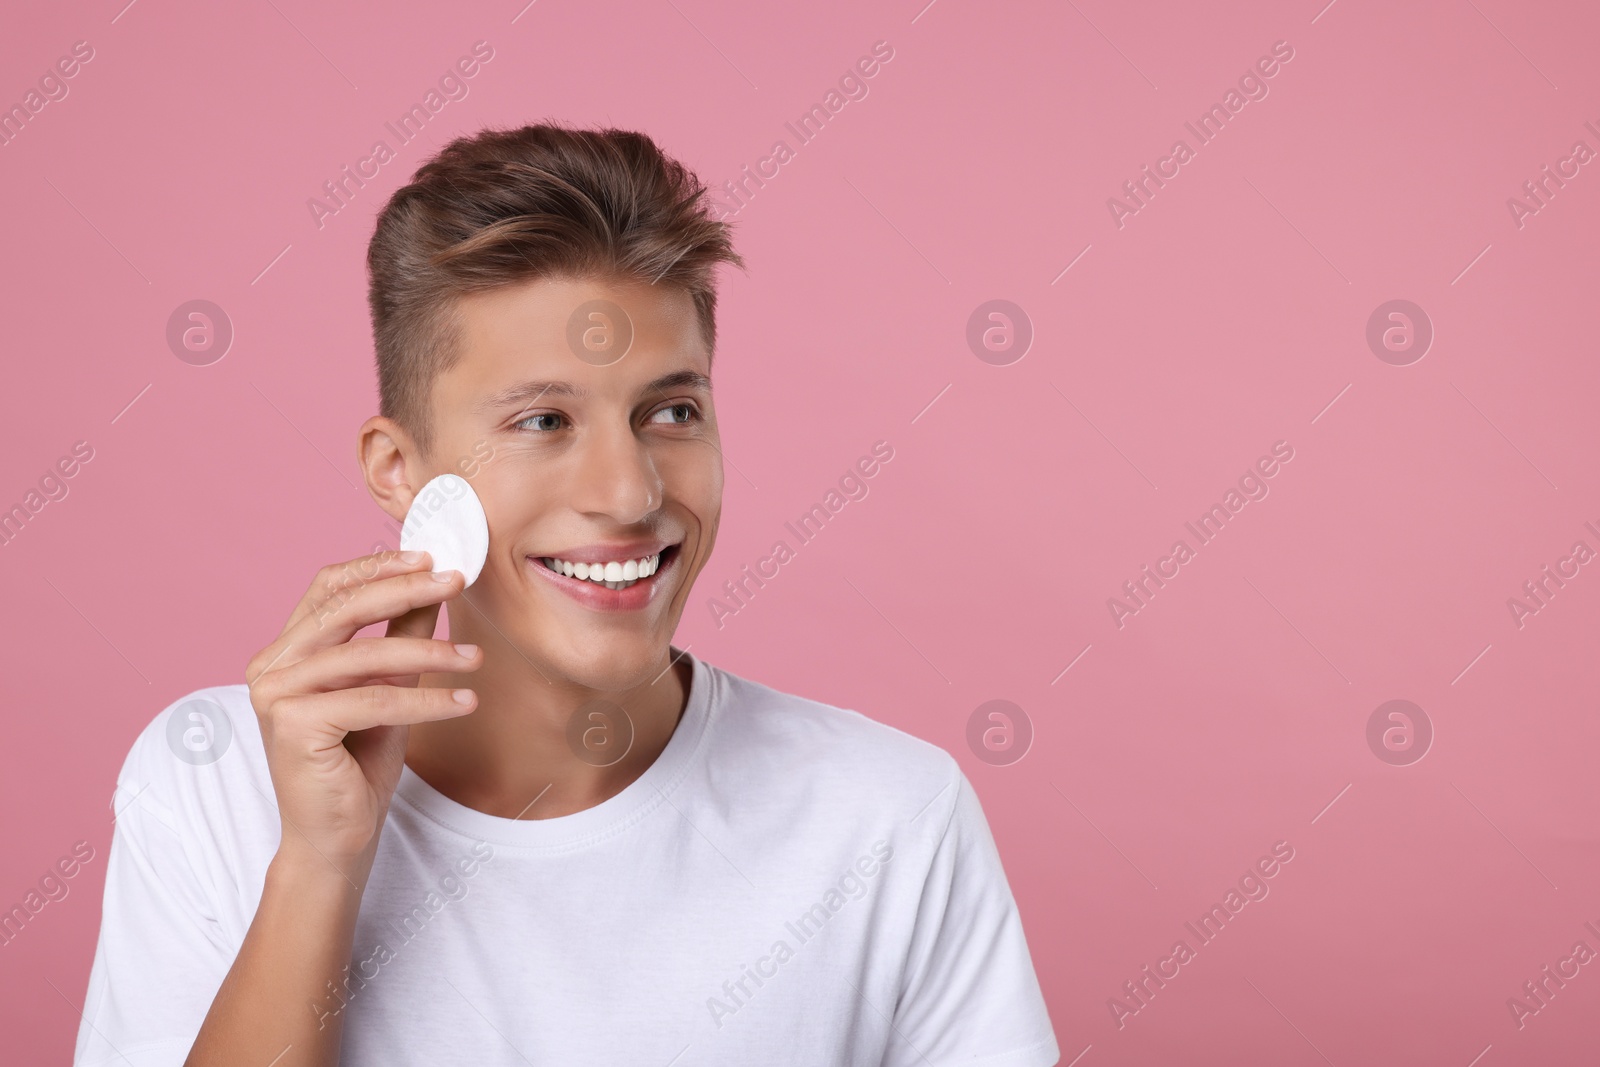 Photo of Handsome man cleaning face with cotton pad on pink background, space for text